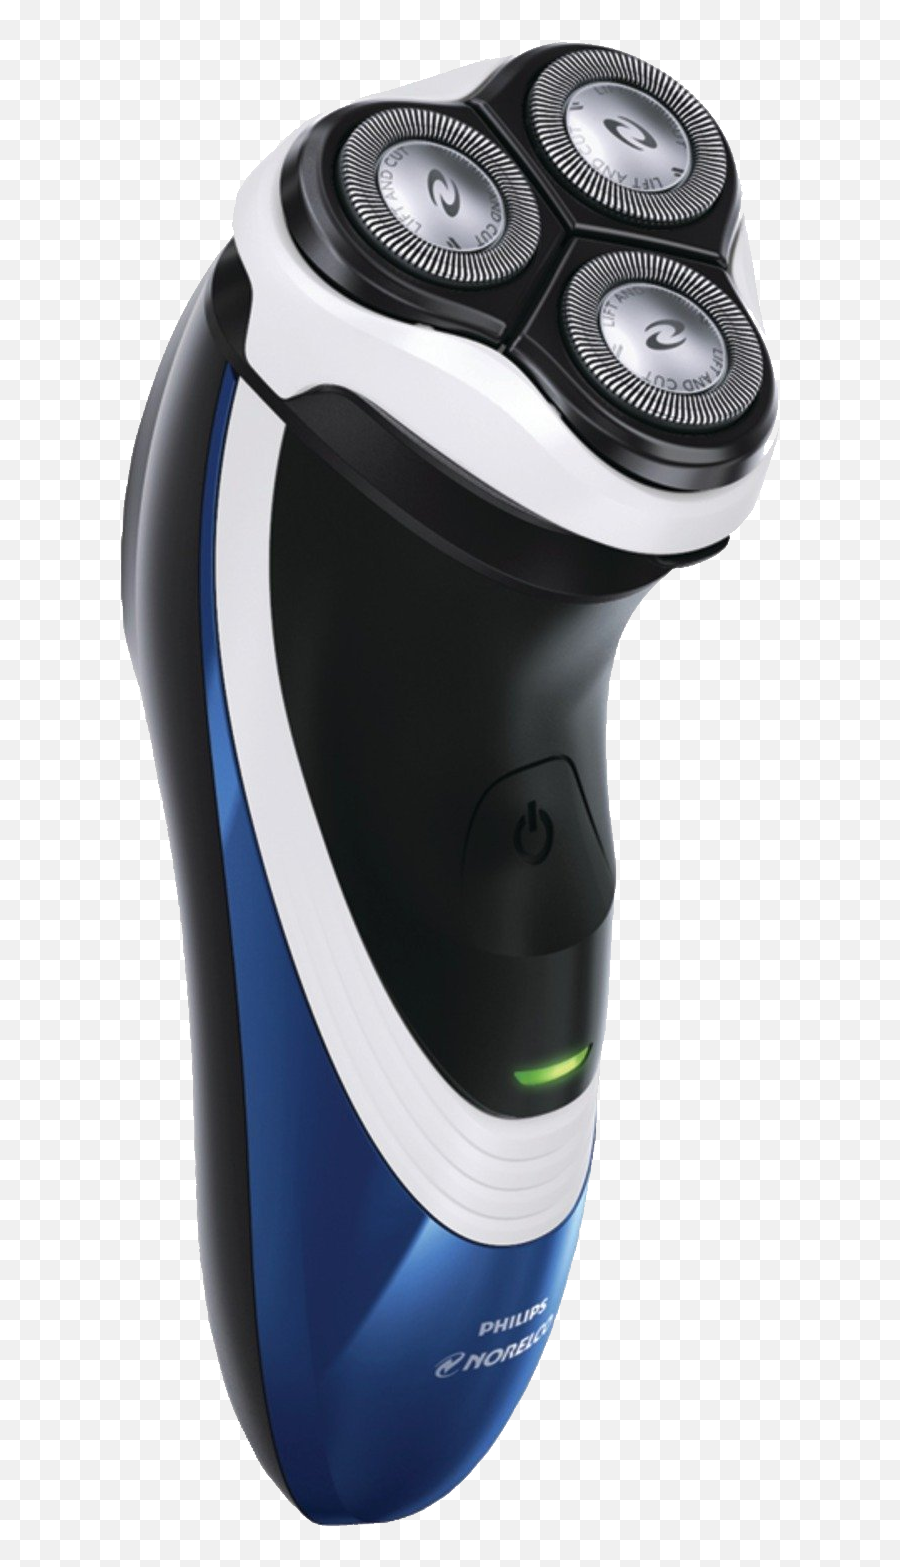 Electric Razor Png Image Without - Philips Norelco Shaver 3100,Razor Png